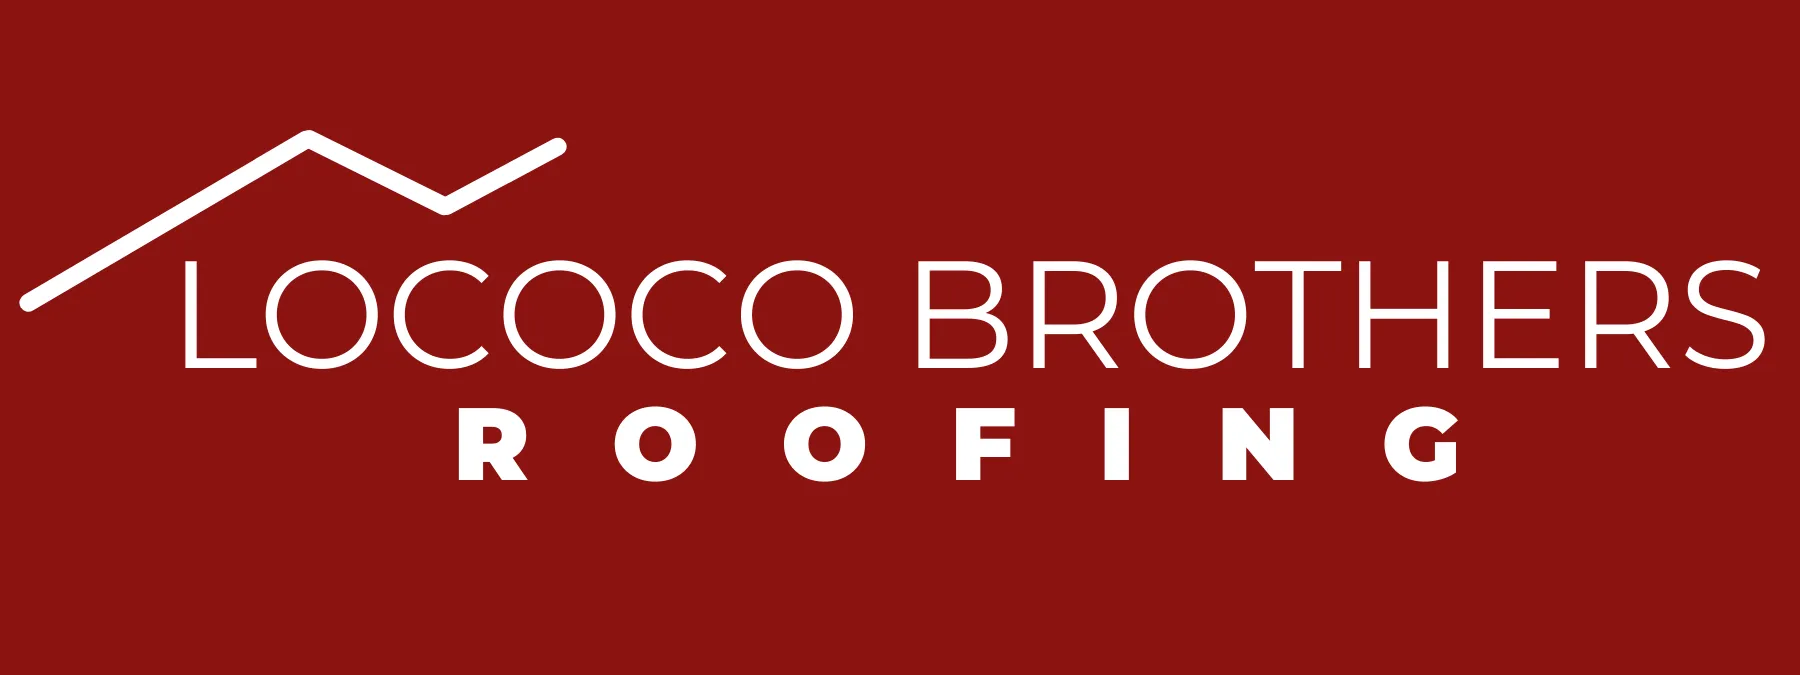 Lococo Brothers Roofing